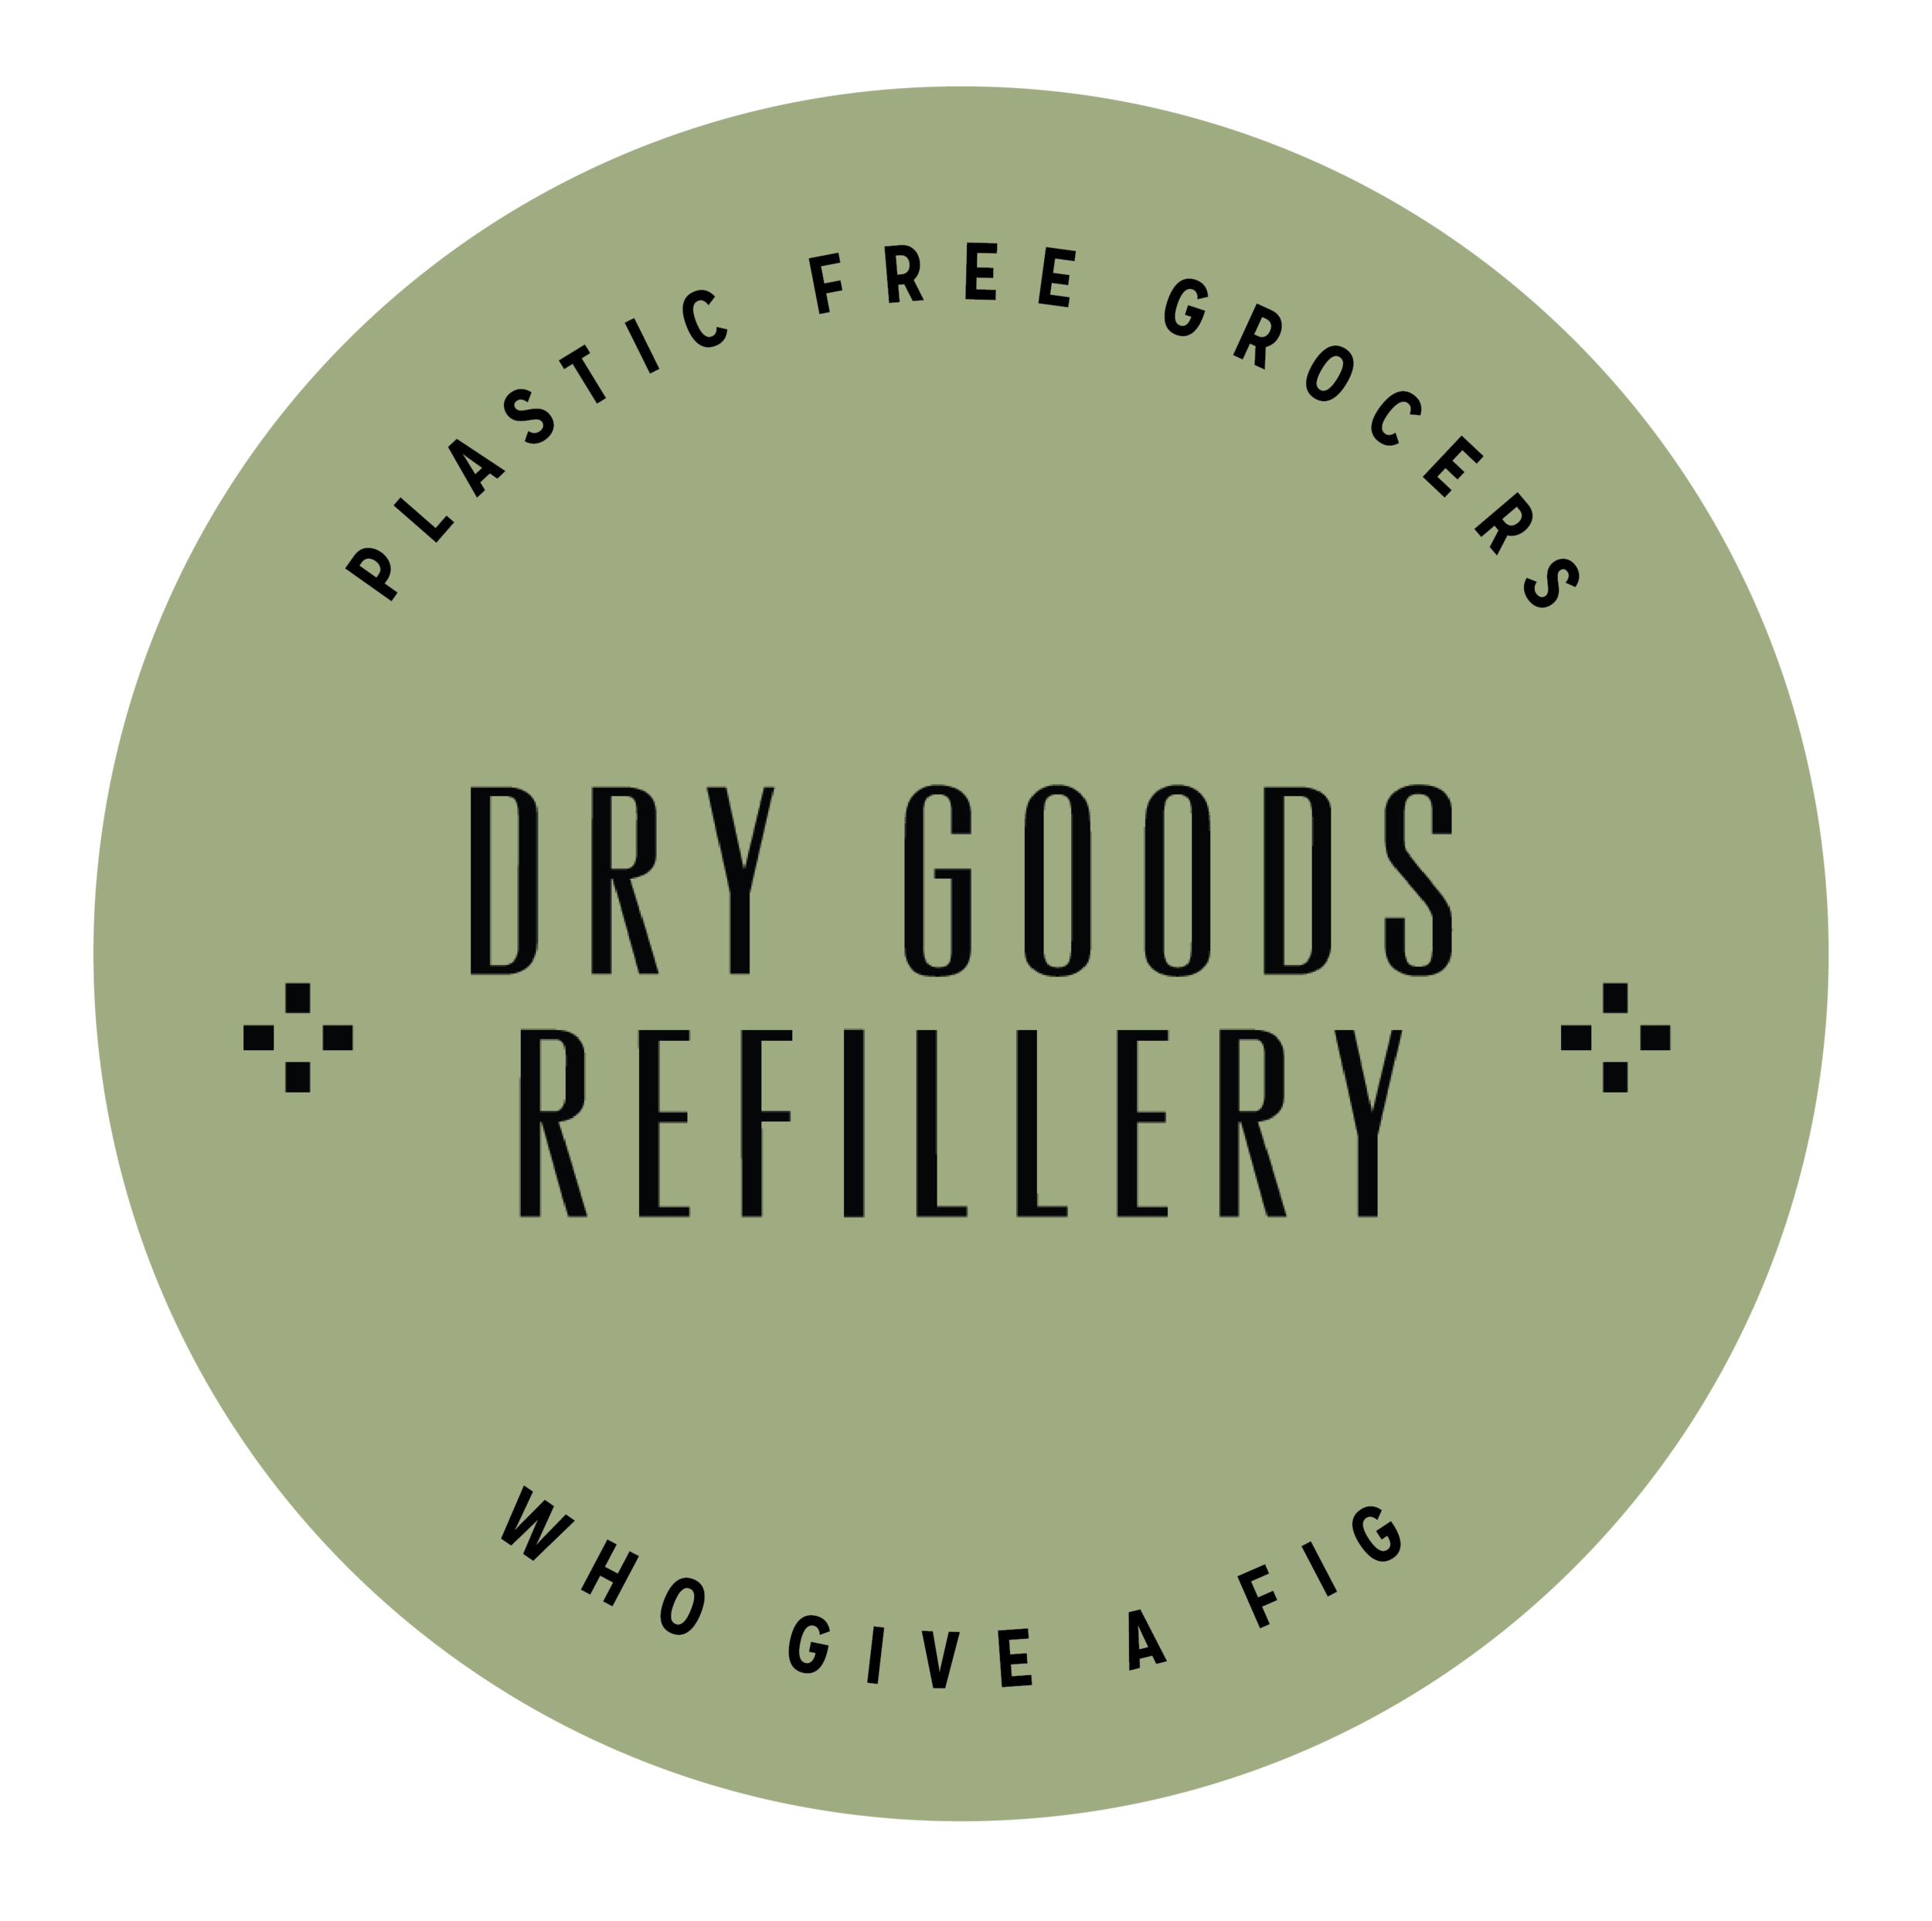 Home  Greater Goods Refillery